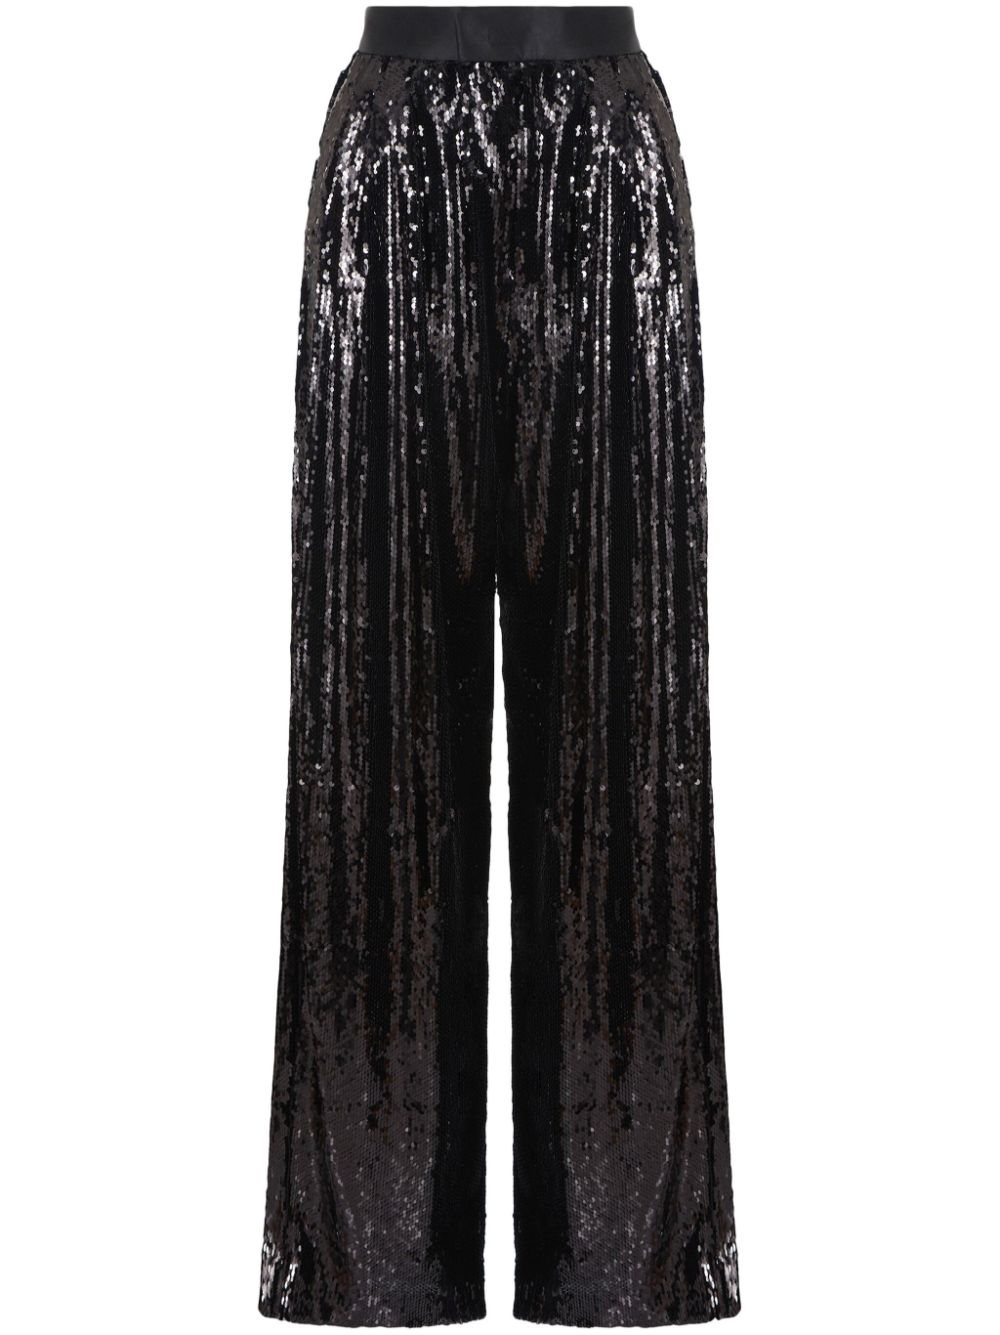 EMPORIO ARMANI SEQUIN-EMBELLISHED HIGH-WAIST TROUSERS